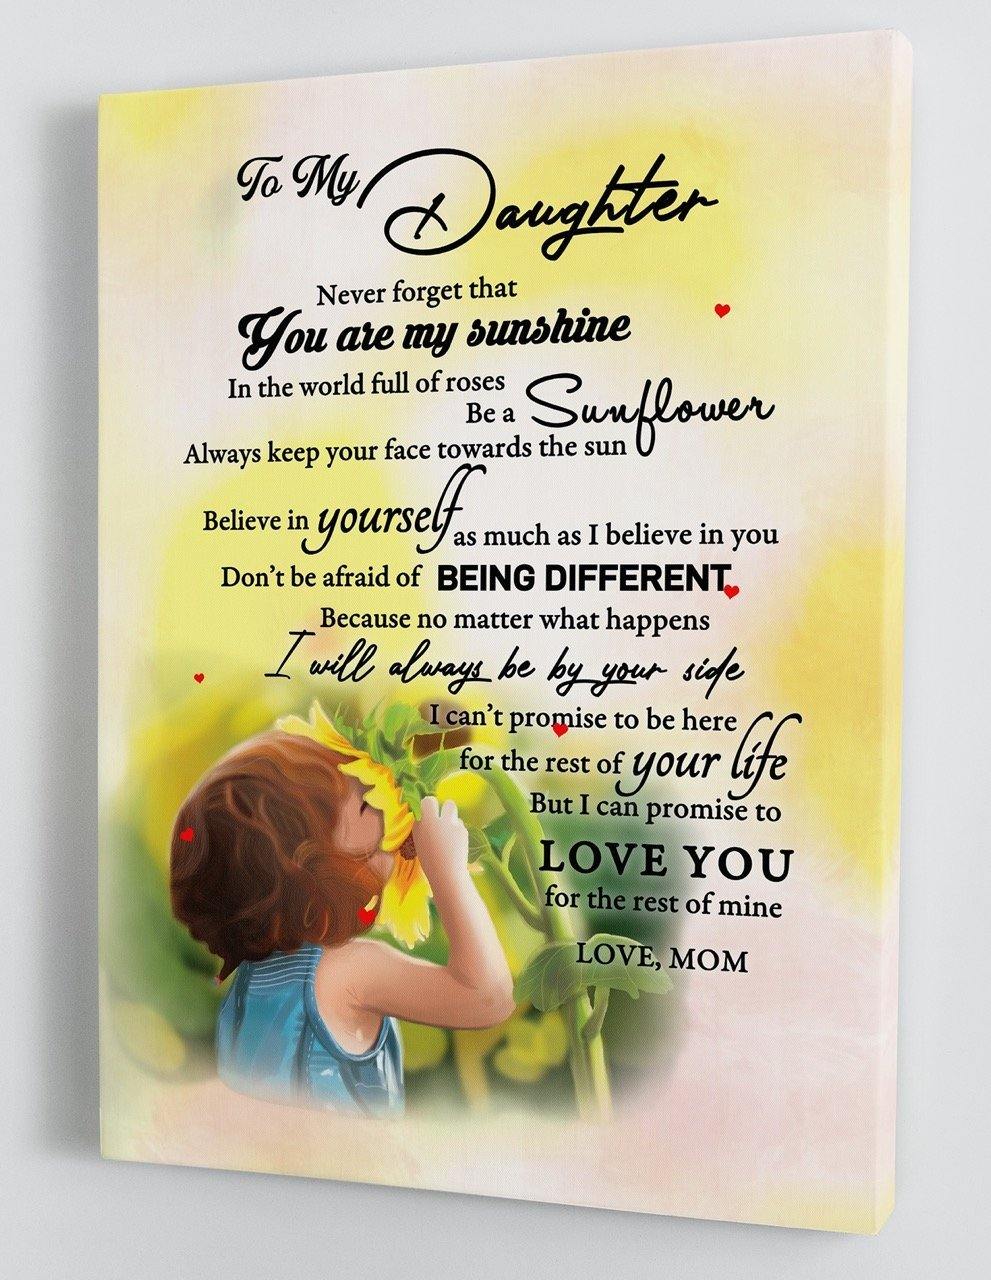 To My Daughter - From Mom - Sunflower Framed Canvas Gift MD018 - DivesArt LLC